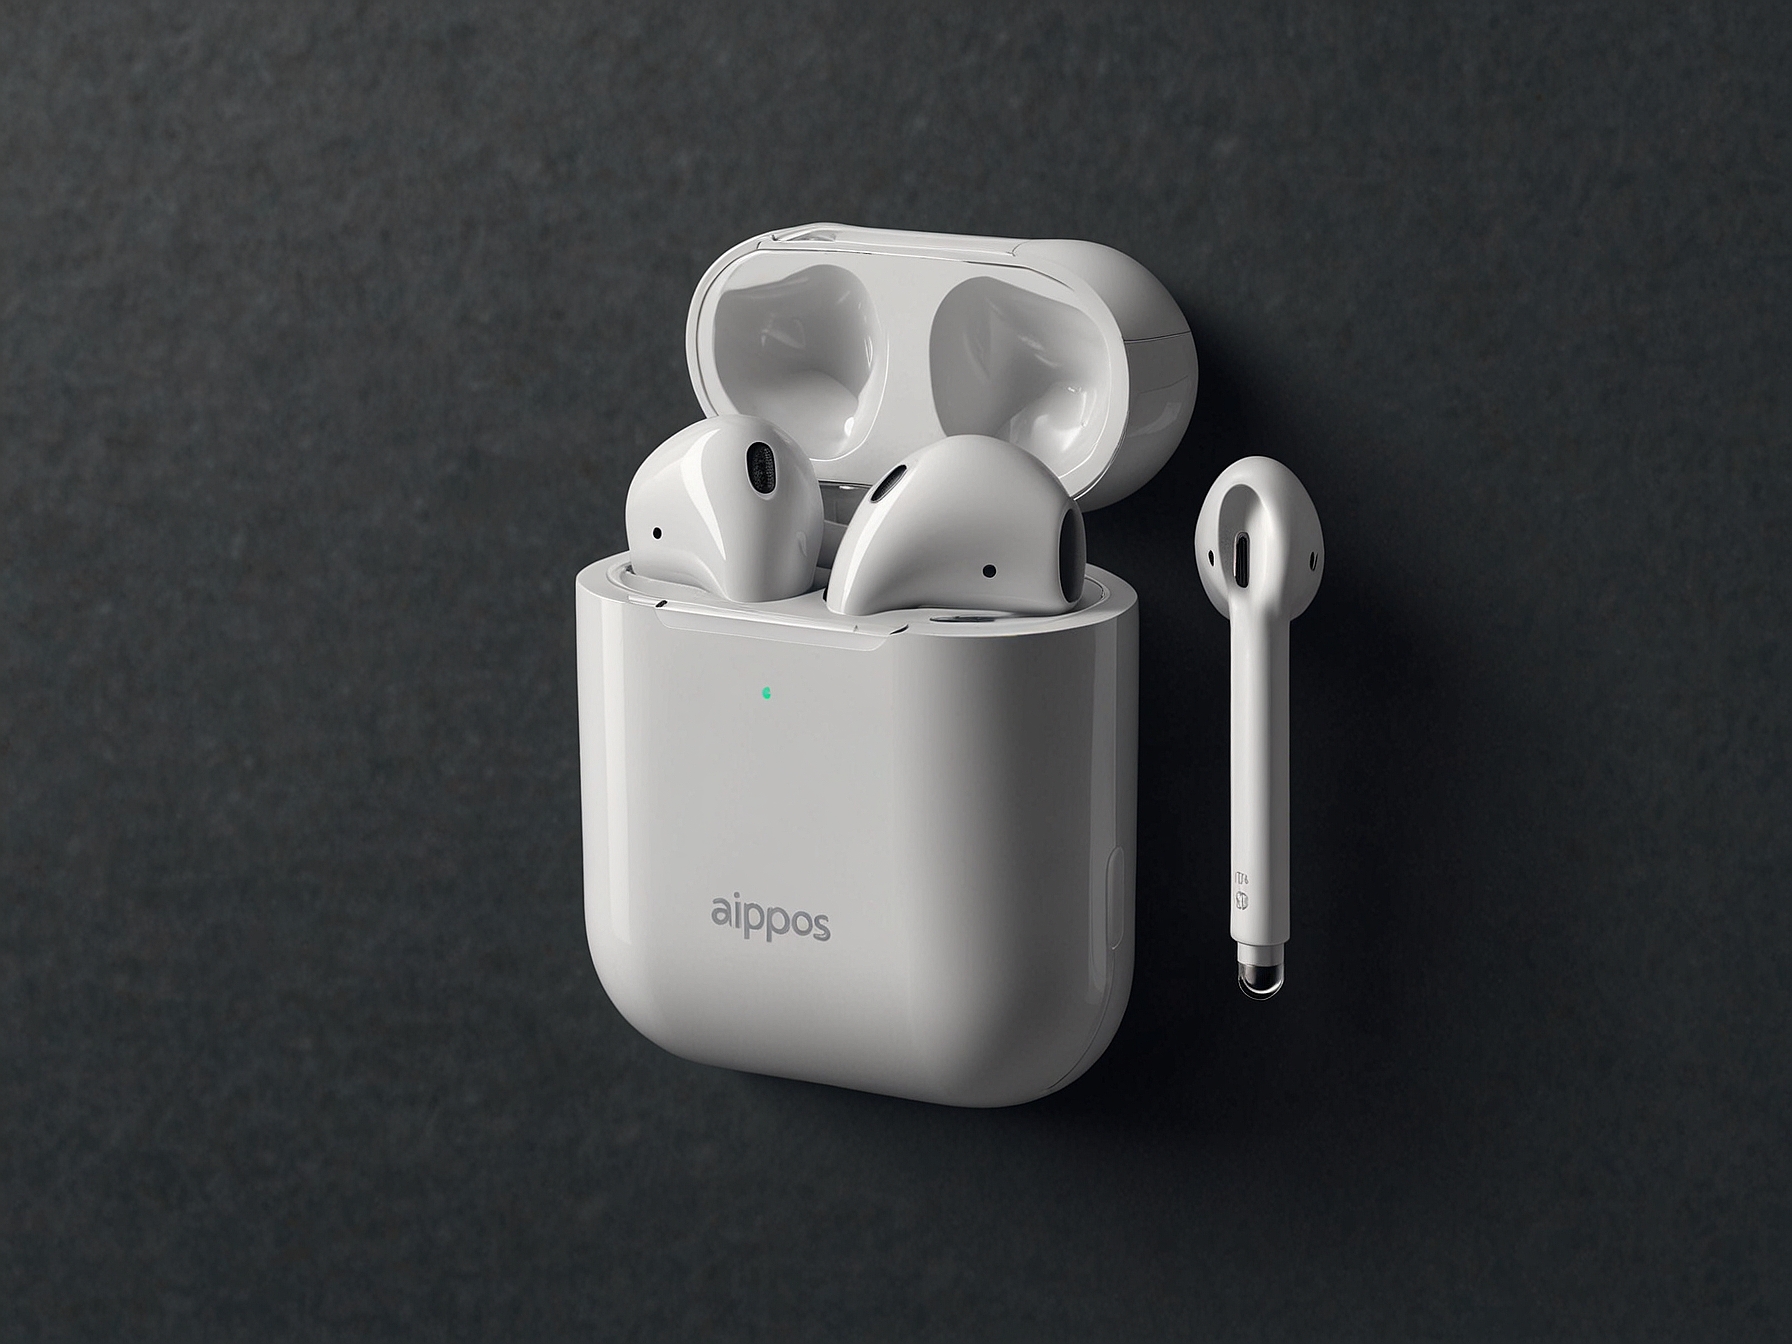 An image displaying discounted Apple AirPods on Amazon during the EOFY sale, showing the reduced price of $152 prominently. The image highlights the sleek design of the earbuds.